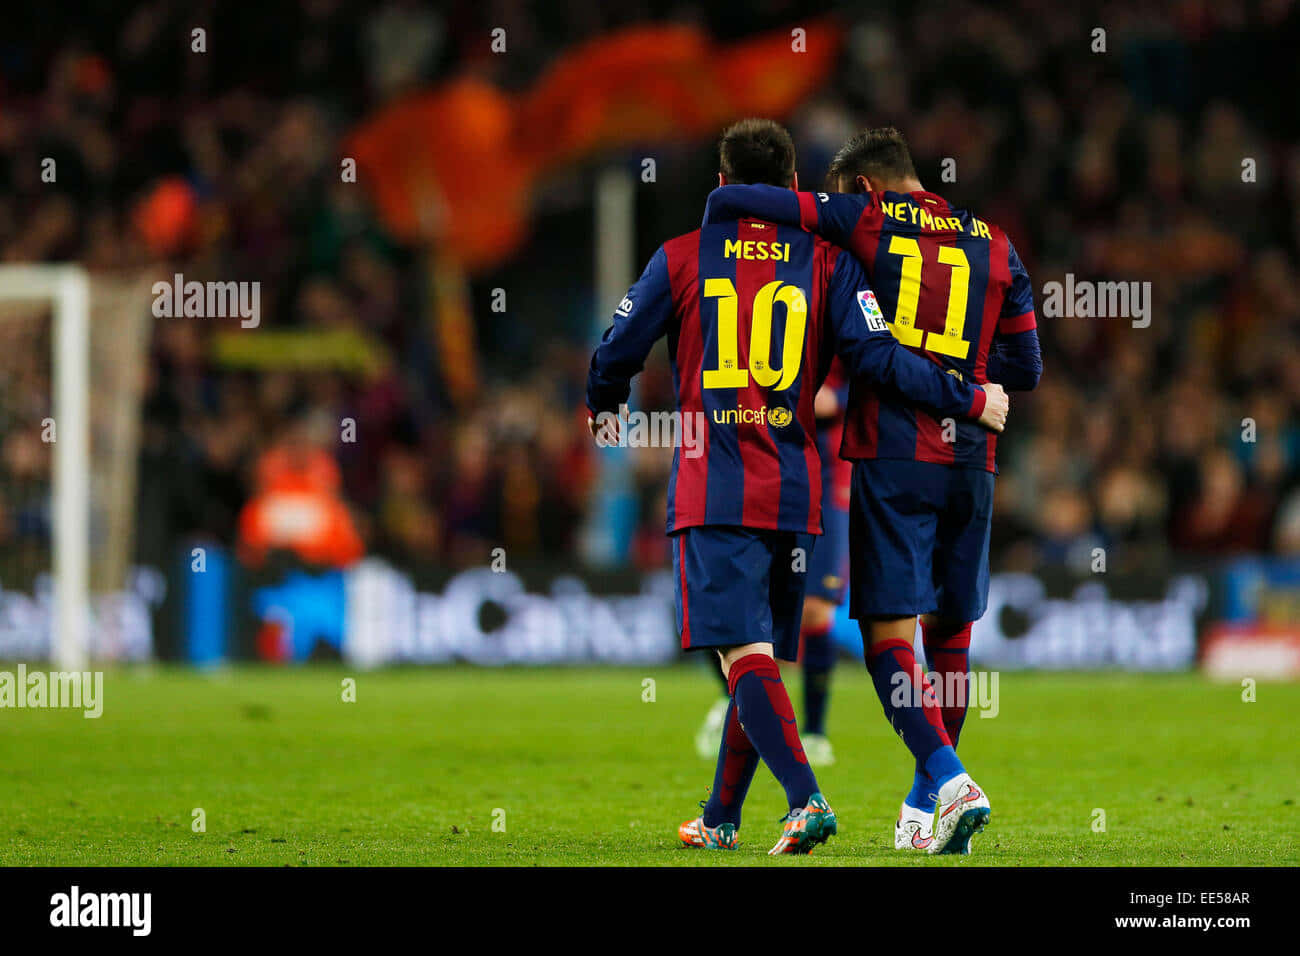 Messi and Neymar: two soccer superstars Wallpaper